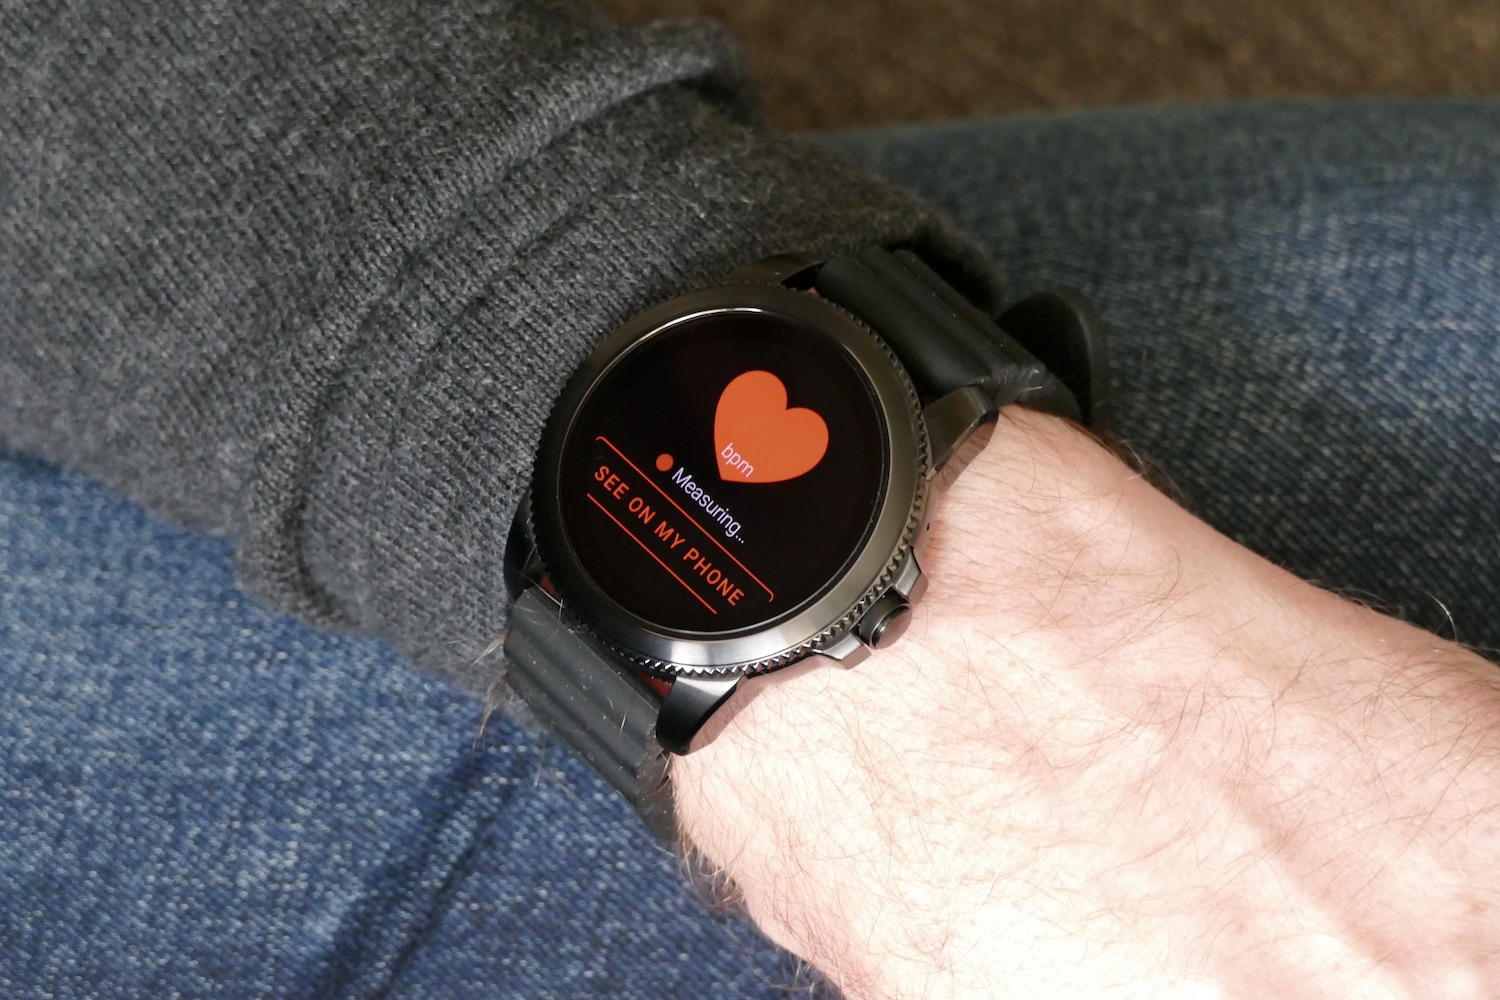 A person wearing the Fossil Gen 5e smartwatch.